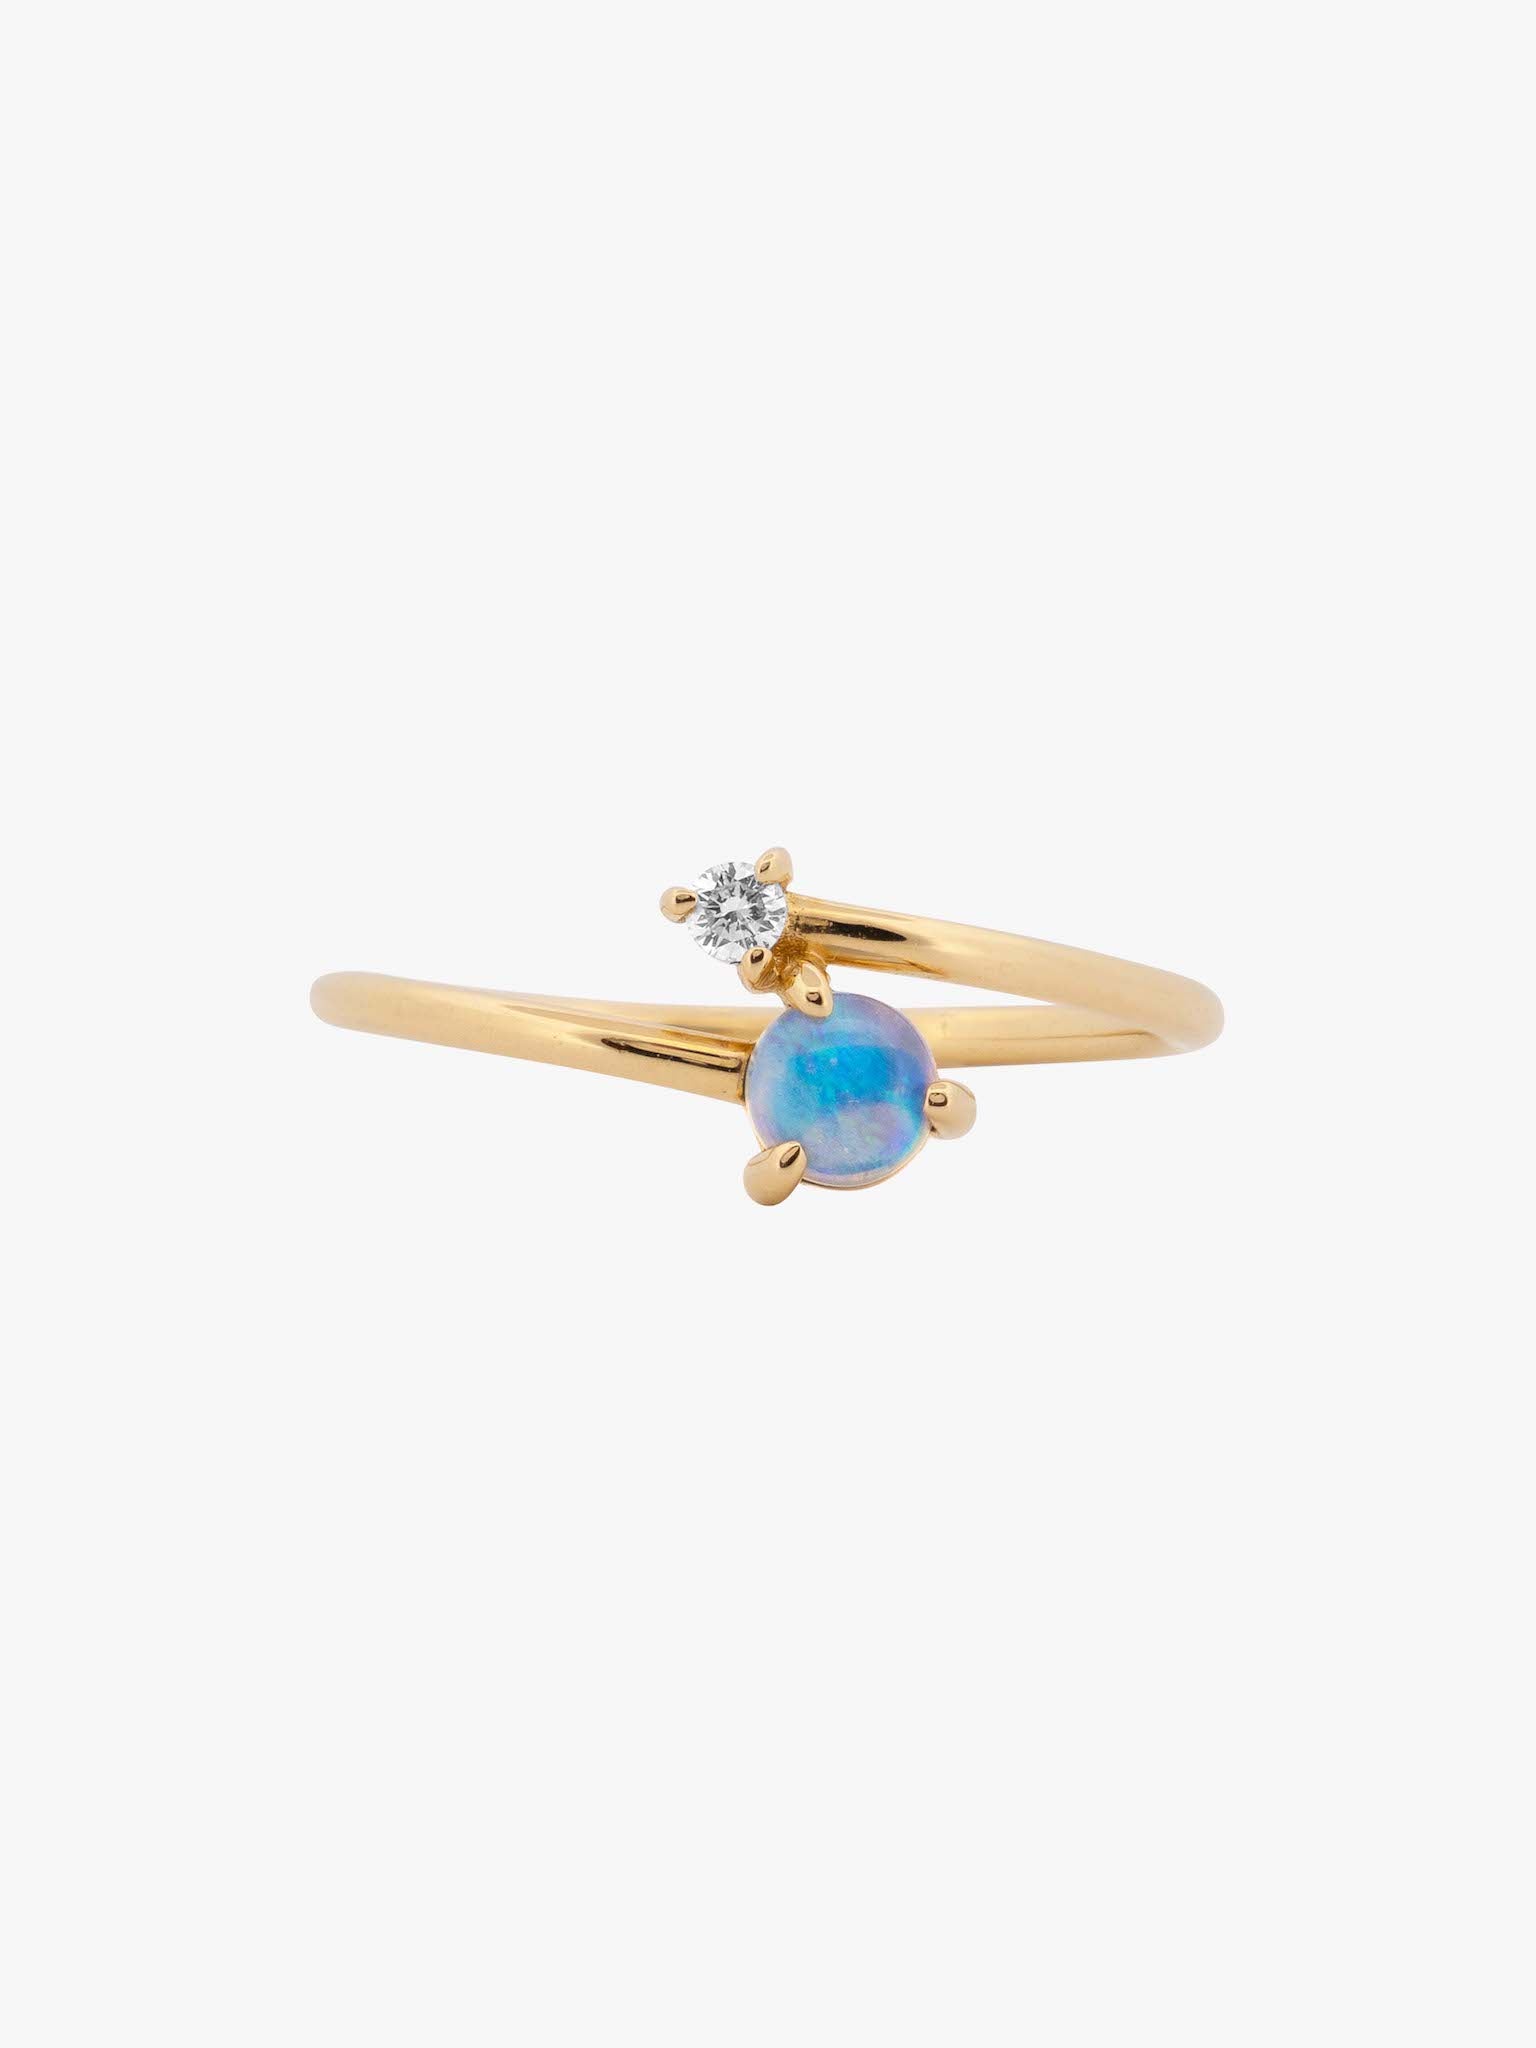 Opal and diamond crossover ring